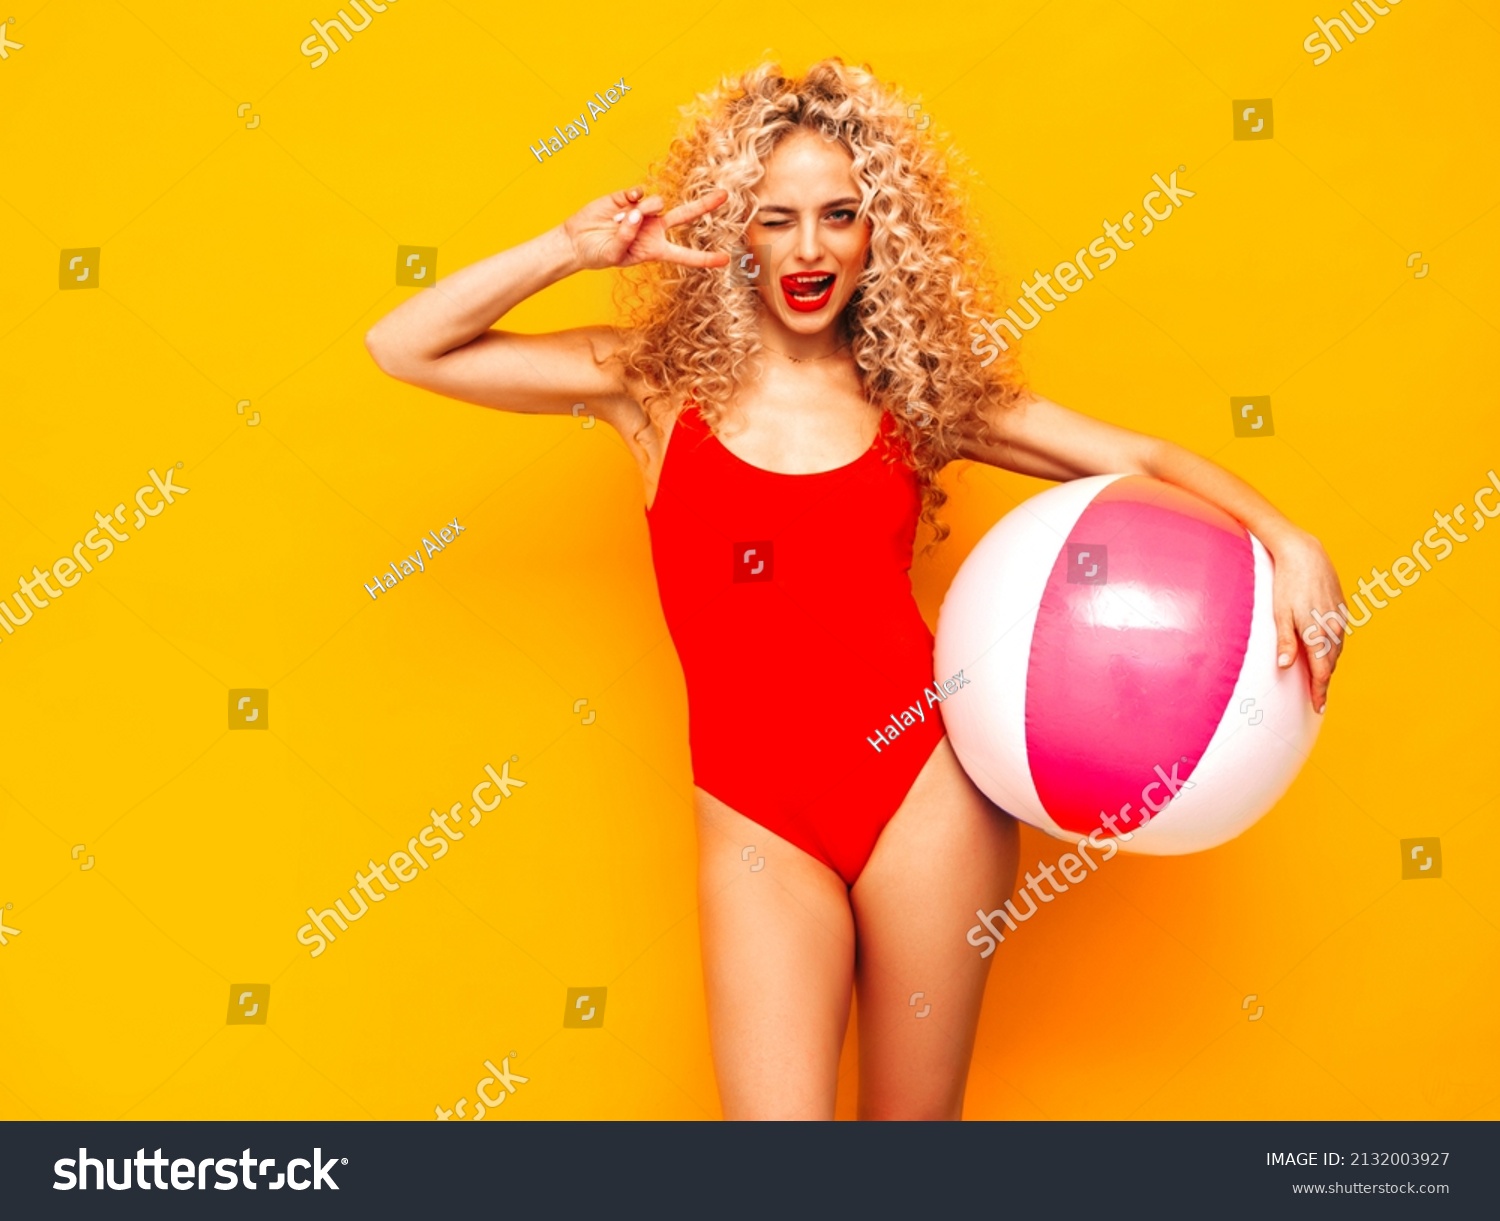 Young beautiful smiling woman posing near yellow wall in studio.Sexy model in red swimwear bathing suit.Positive female with curls hairstyle. Holding penny inflatable ball.Happy and cheerful #2132003927